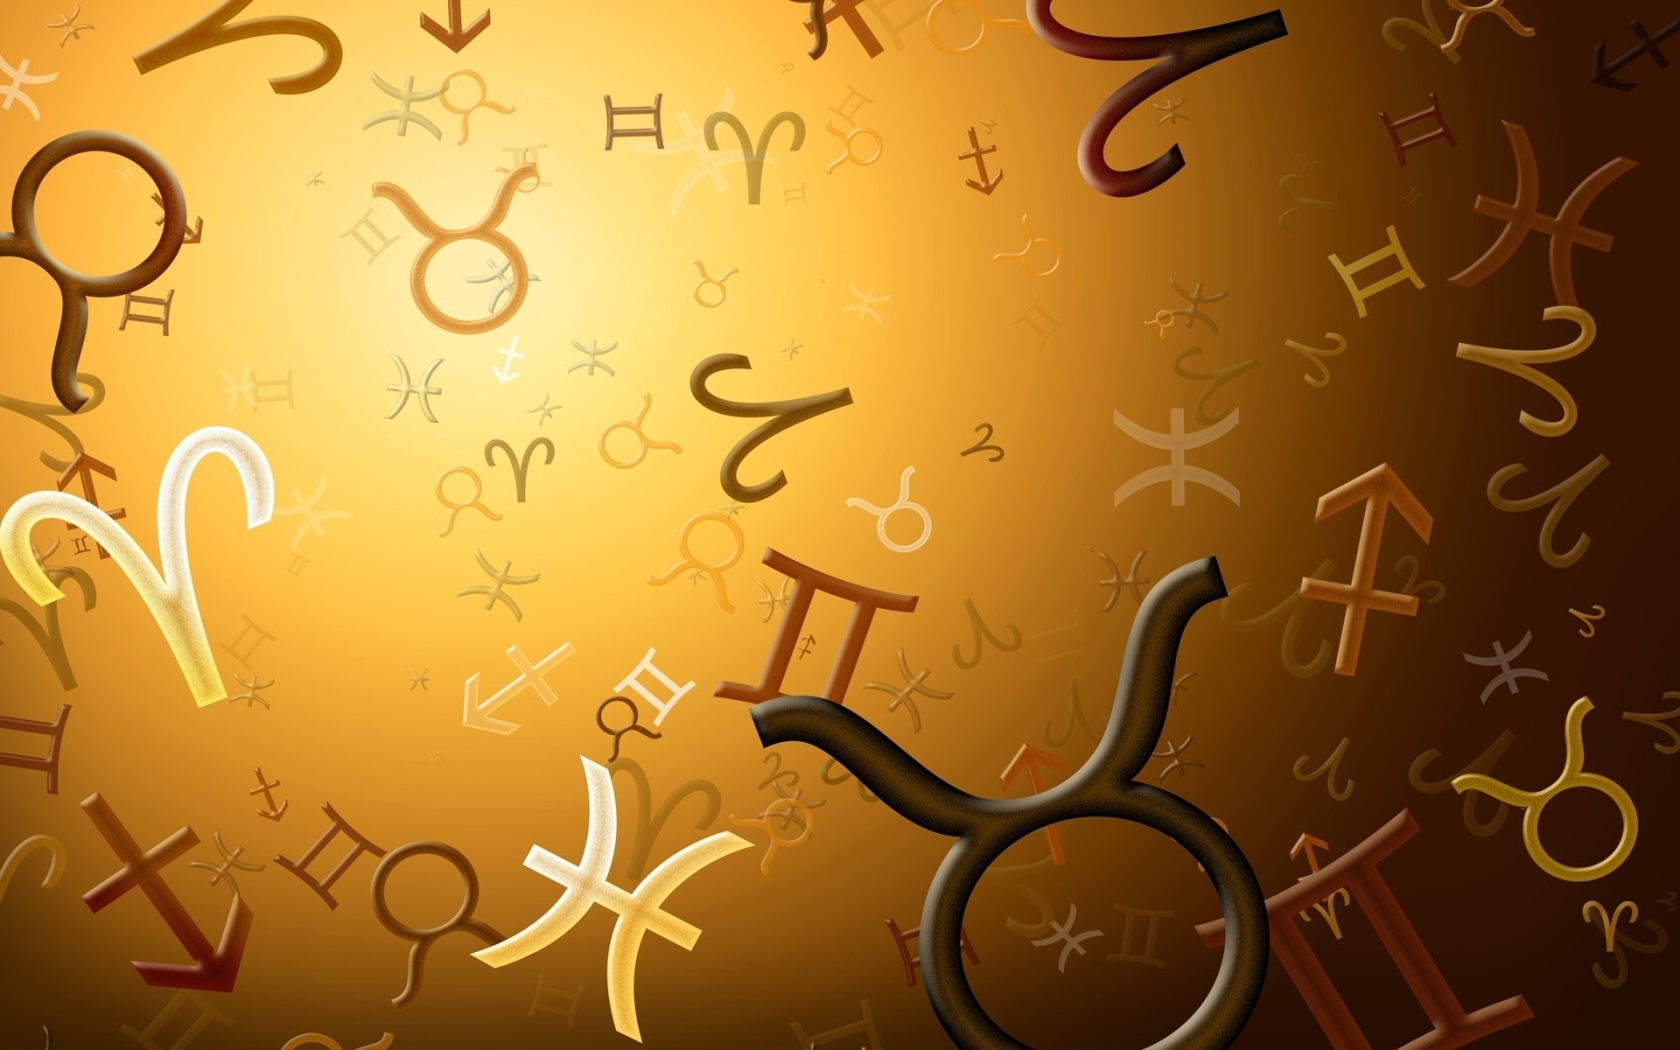 Signs of the Zodiac soar on a brown background